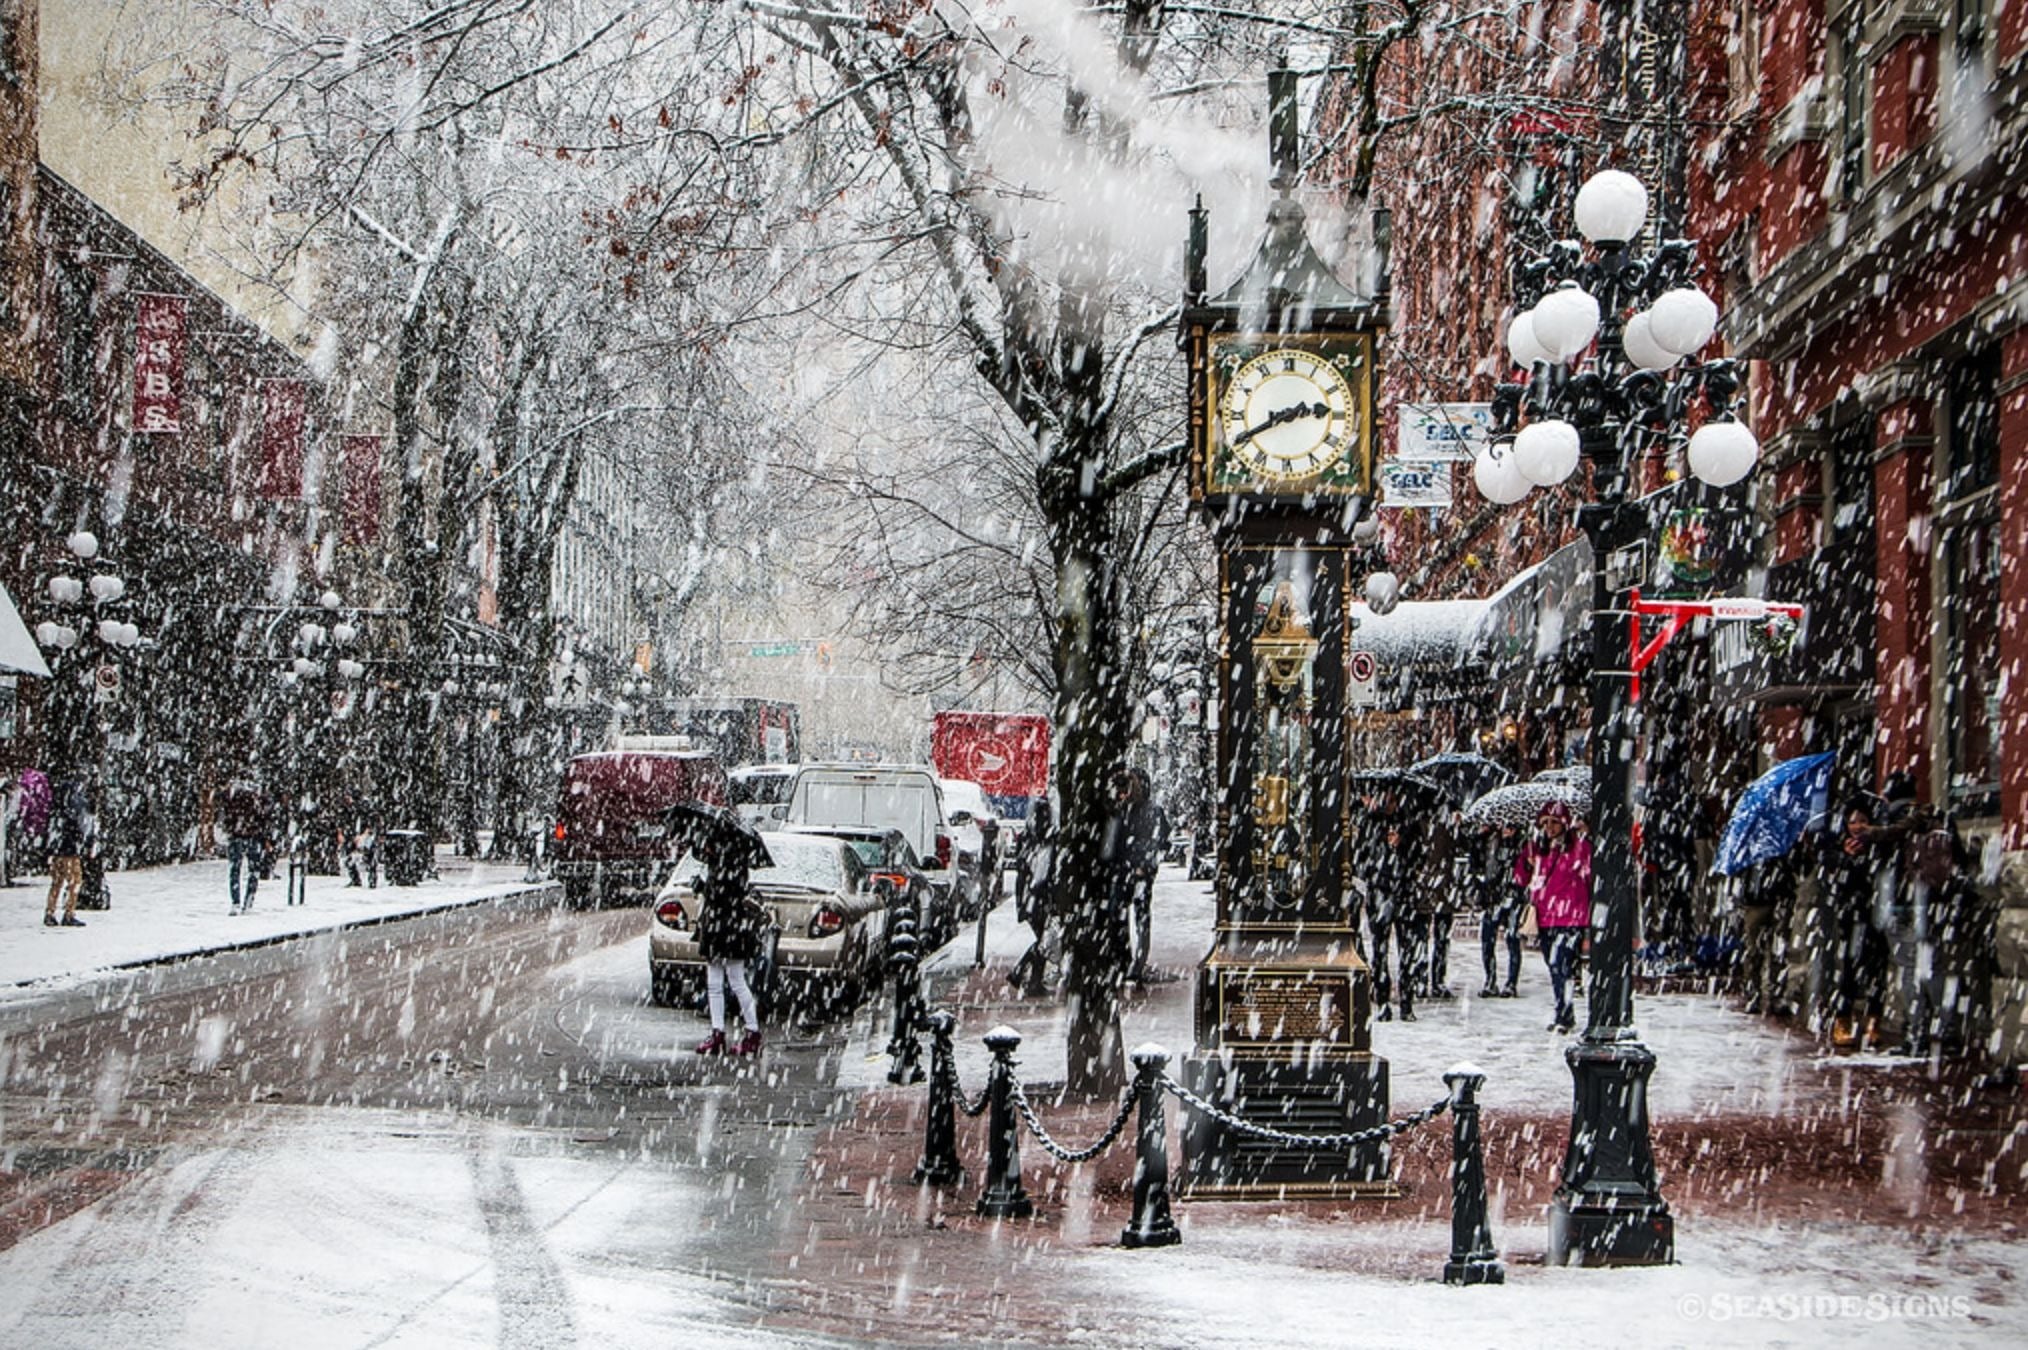 tourist attractions in vancouver in winter